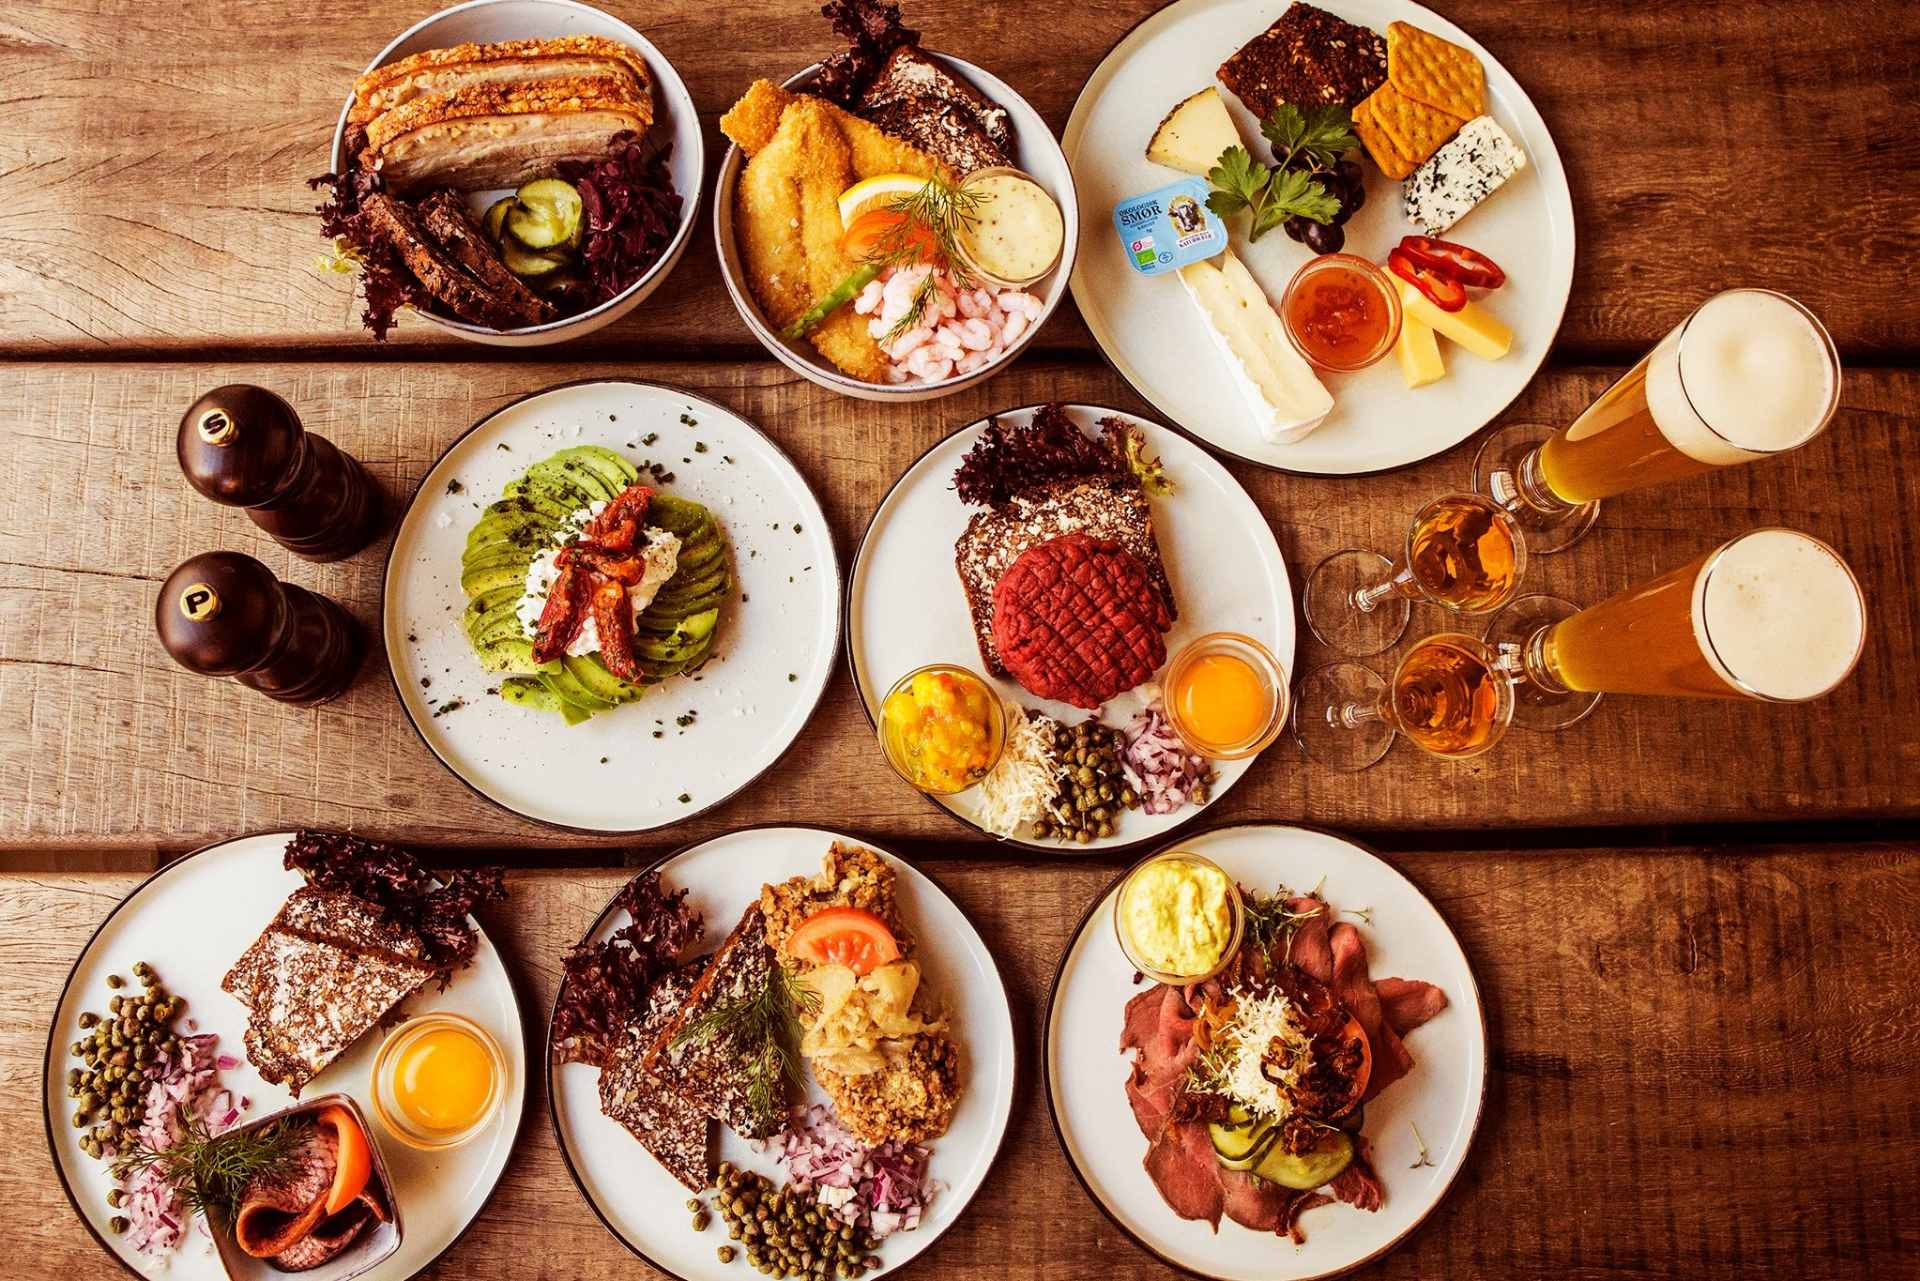 plates-of-food-on-wooden-table-at-restaurant-m-3-days-in-copenhagen-itinerary